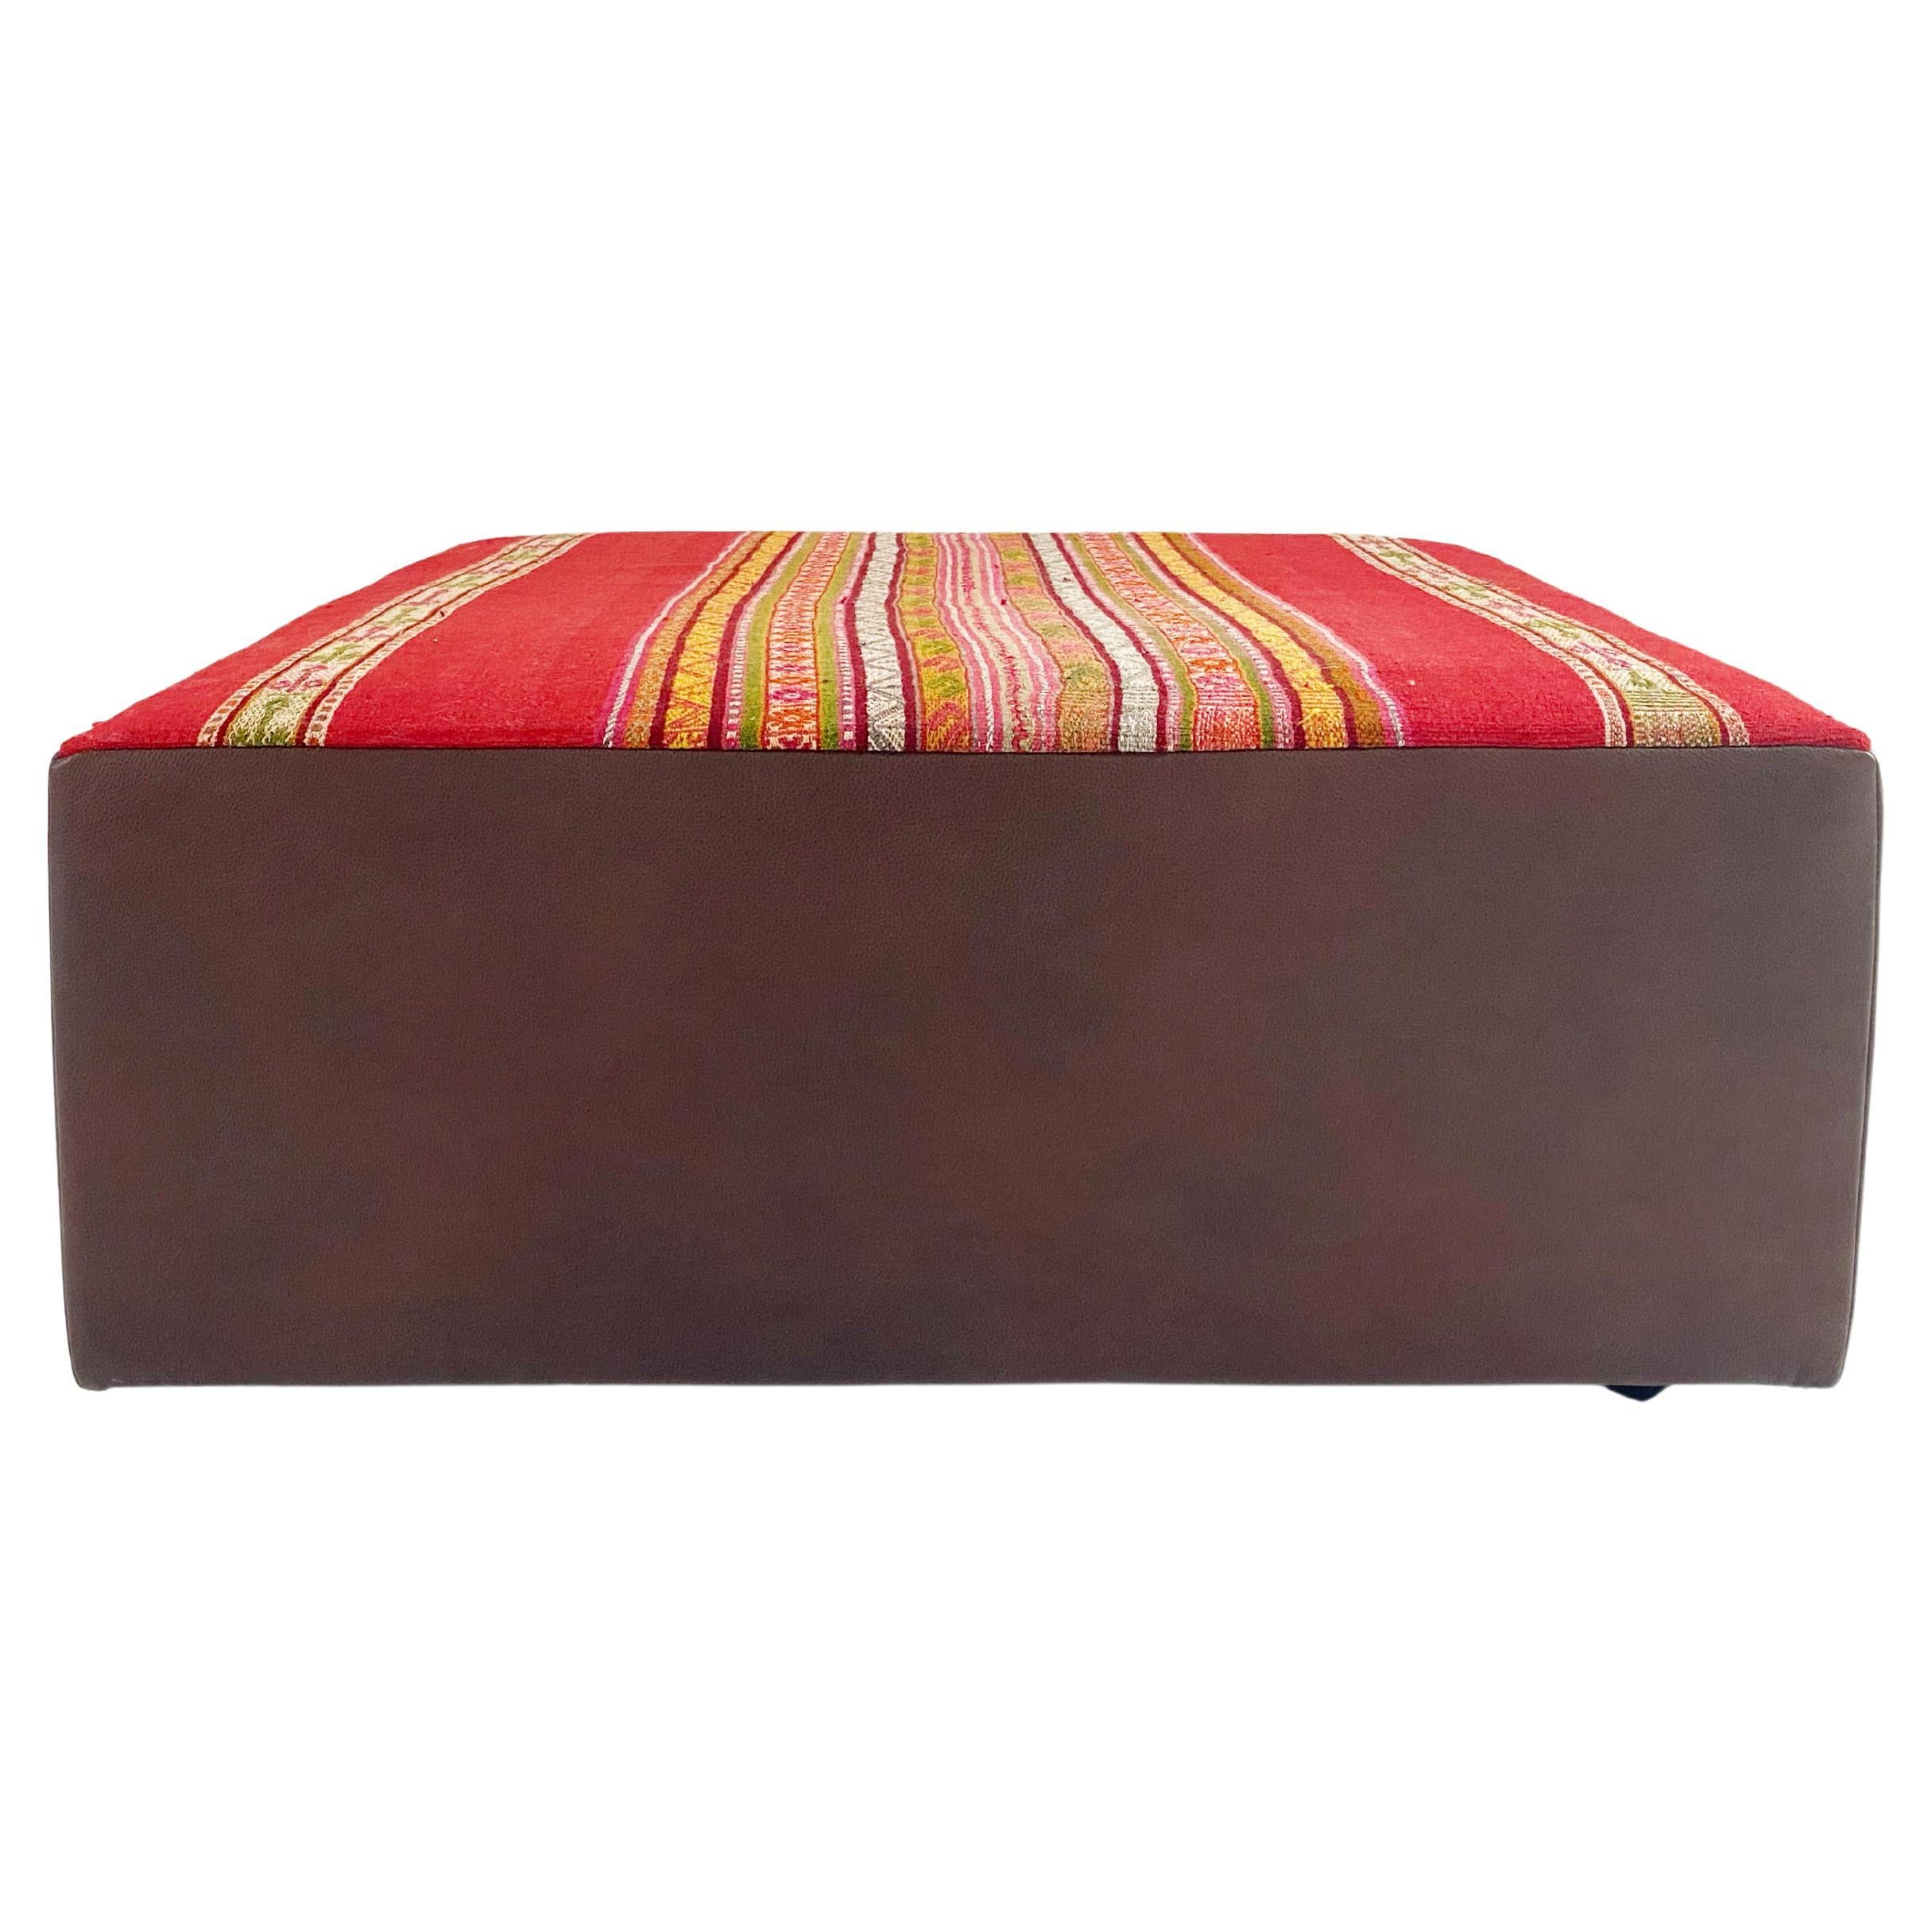 Forsyth One-of-a-kind Ottoman with Vintage Peruvian Textile, Red For Sale